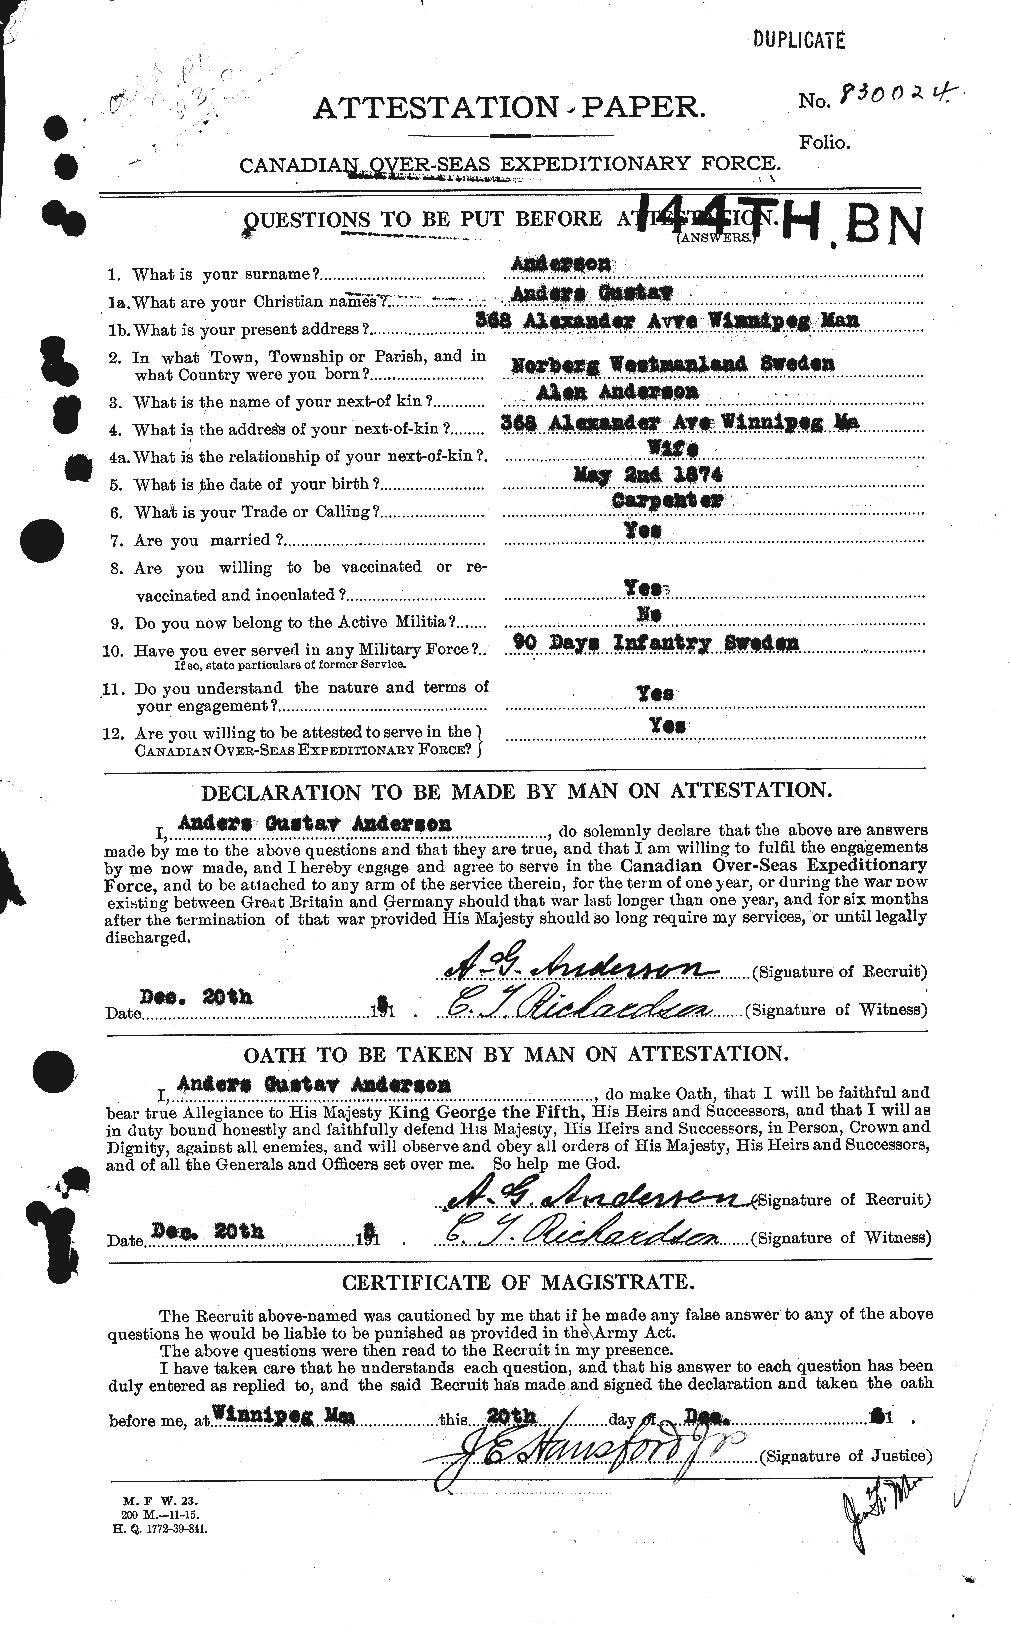 Personnel Records of the First World War - CEF 209398a